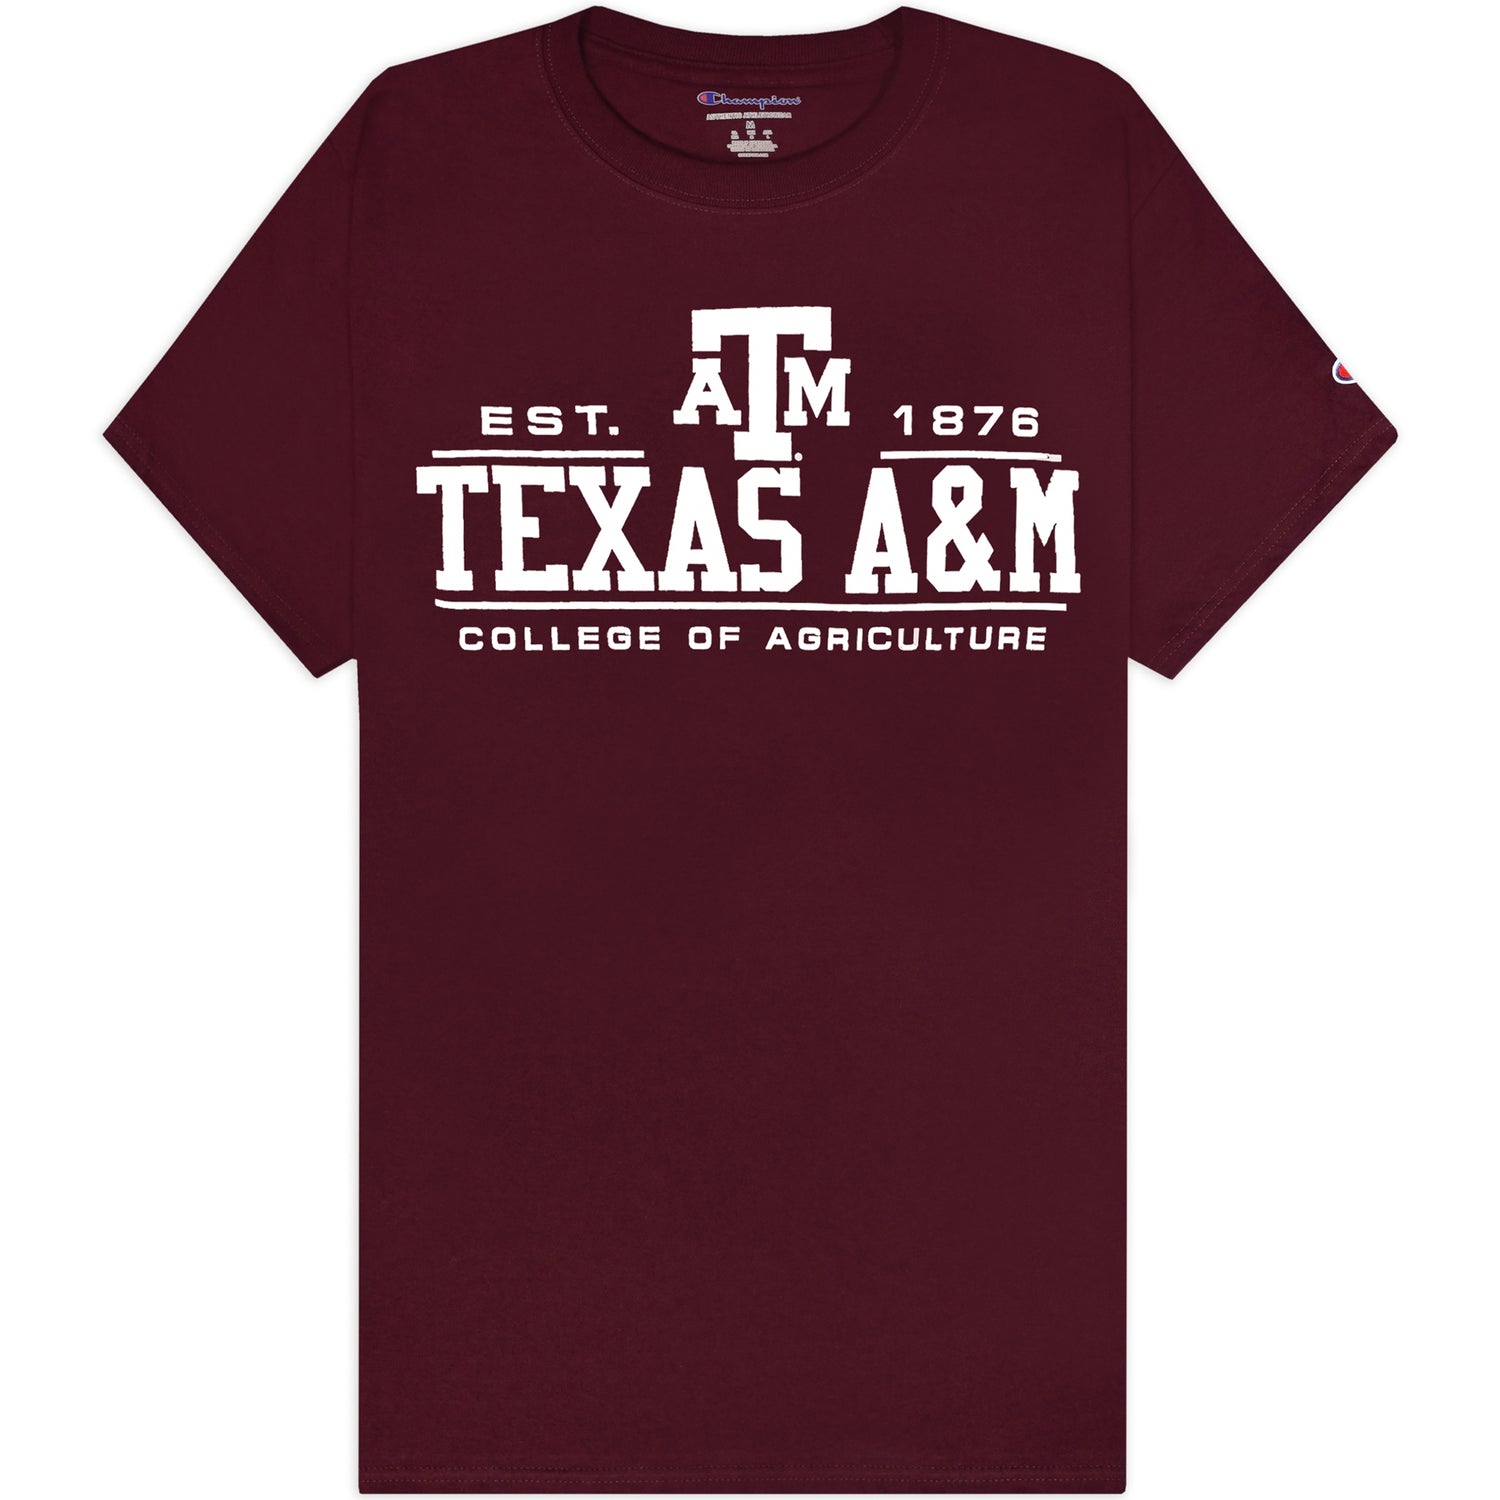 Texas A&M Champion College of Agriculture T-Shirt